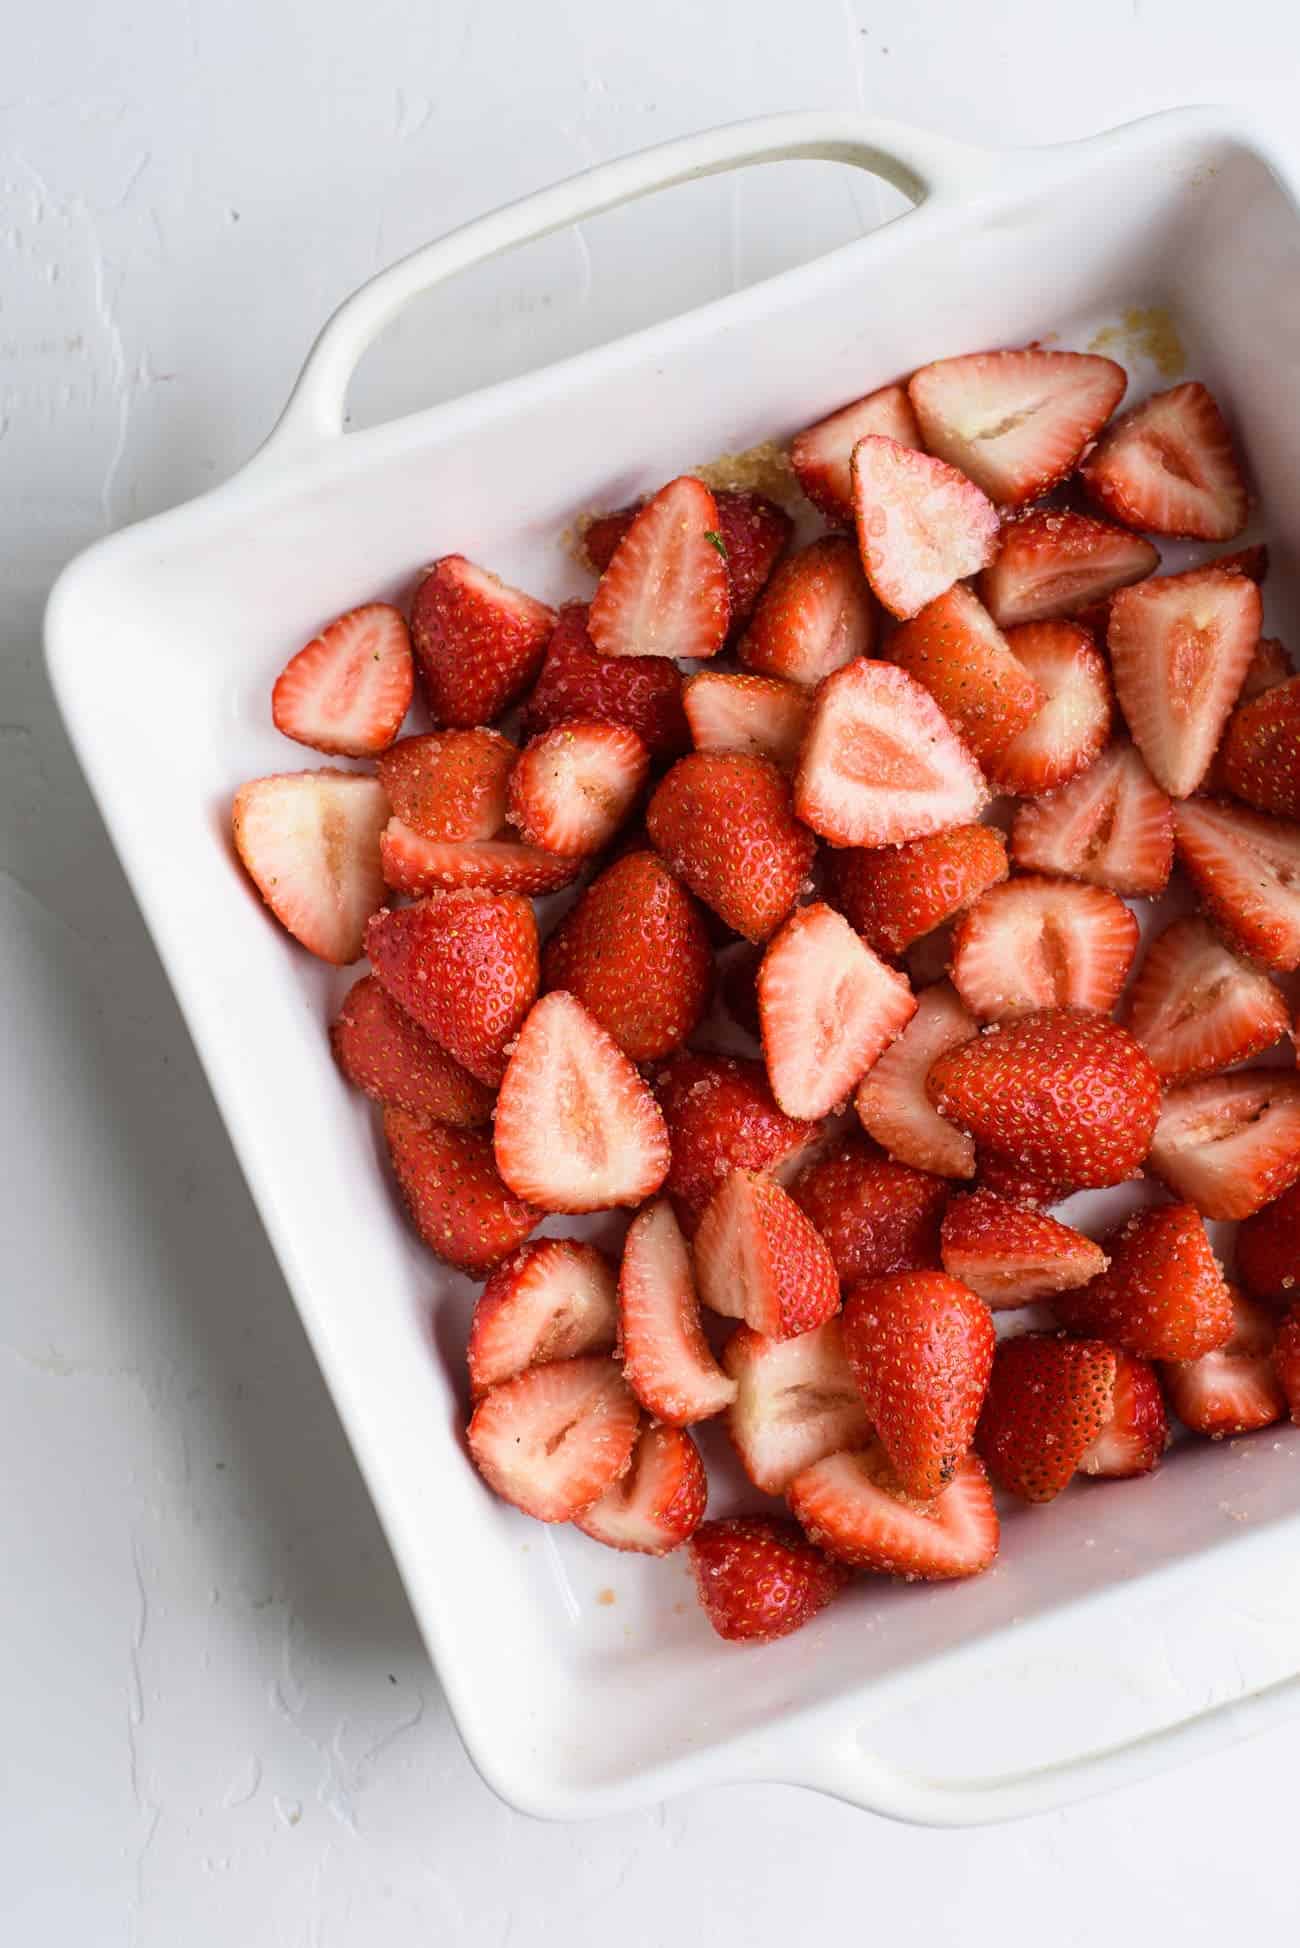 Strawberries tossed with sugar in a white baking dish, ready to be roasted